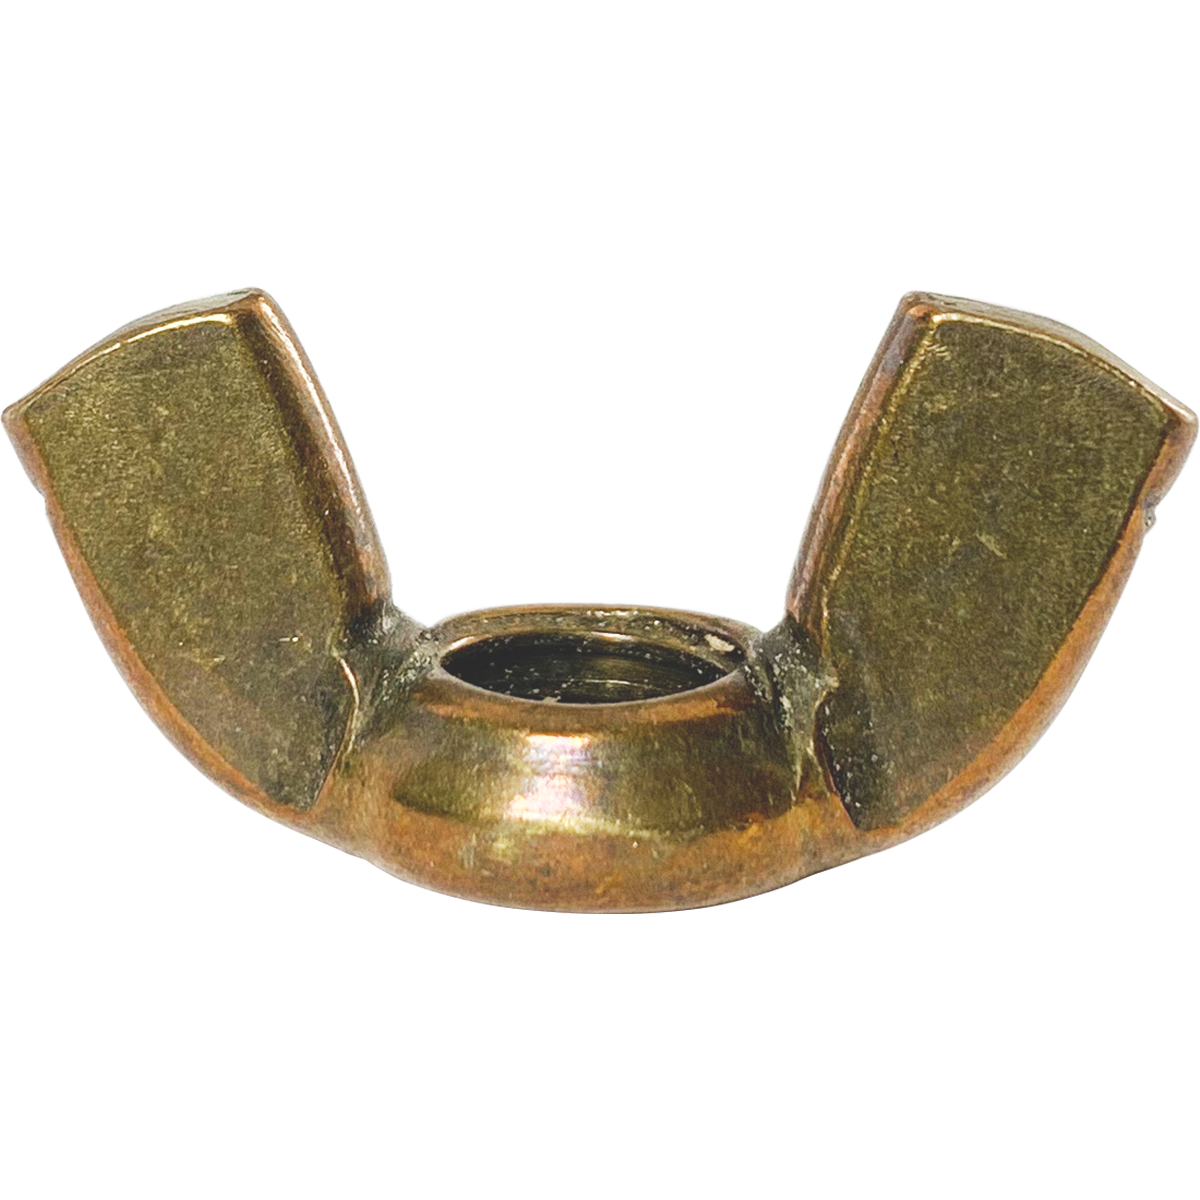 Great prices on brass wing nuts, also known as butterfly nuts